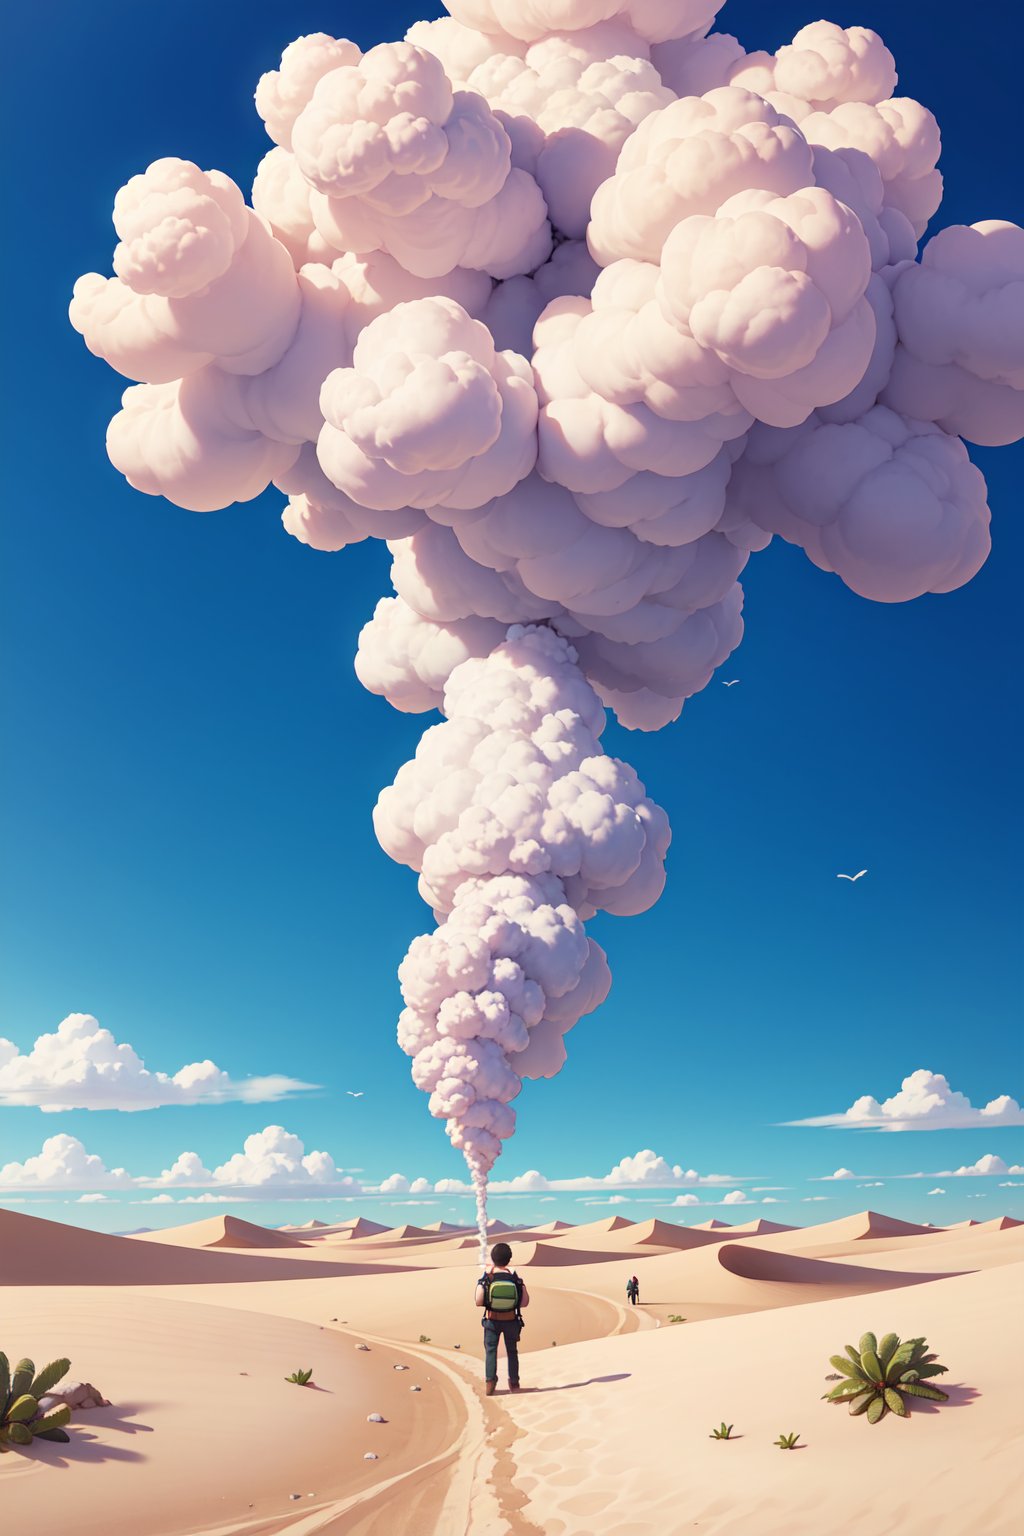 Clouds exploding in the desert